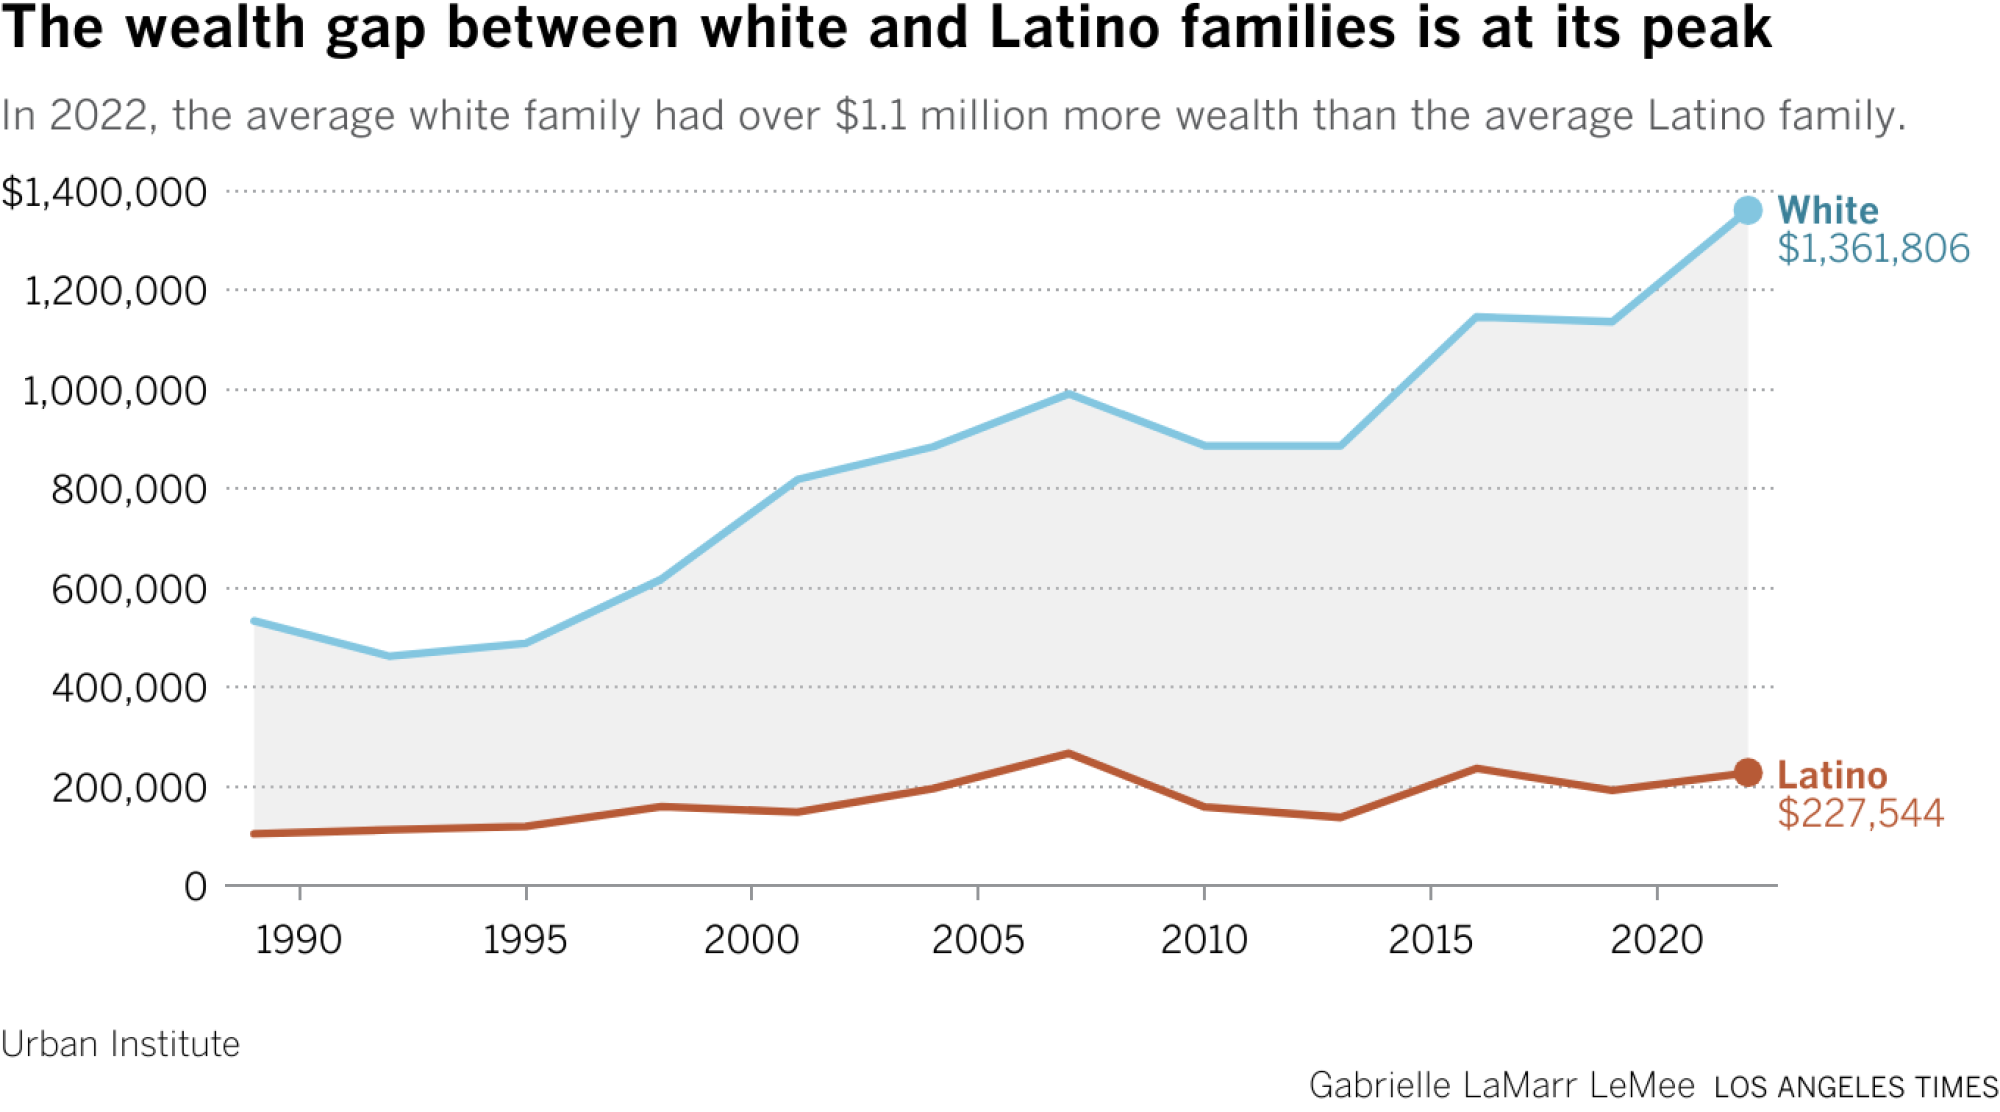 A line chart showing that the the median wealth gap between white and Latino families has peaked in 2022 at $222,190.